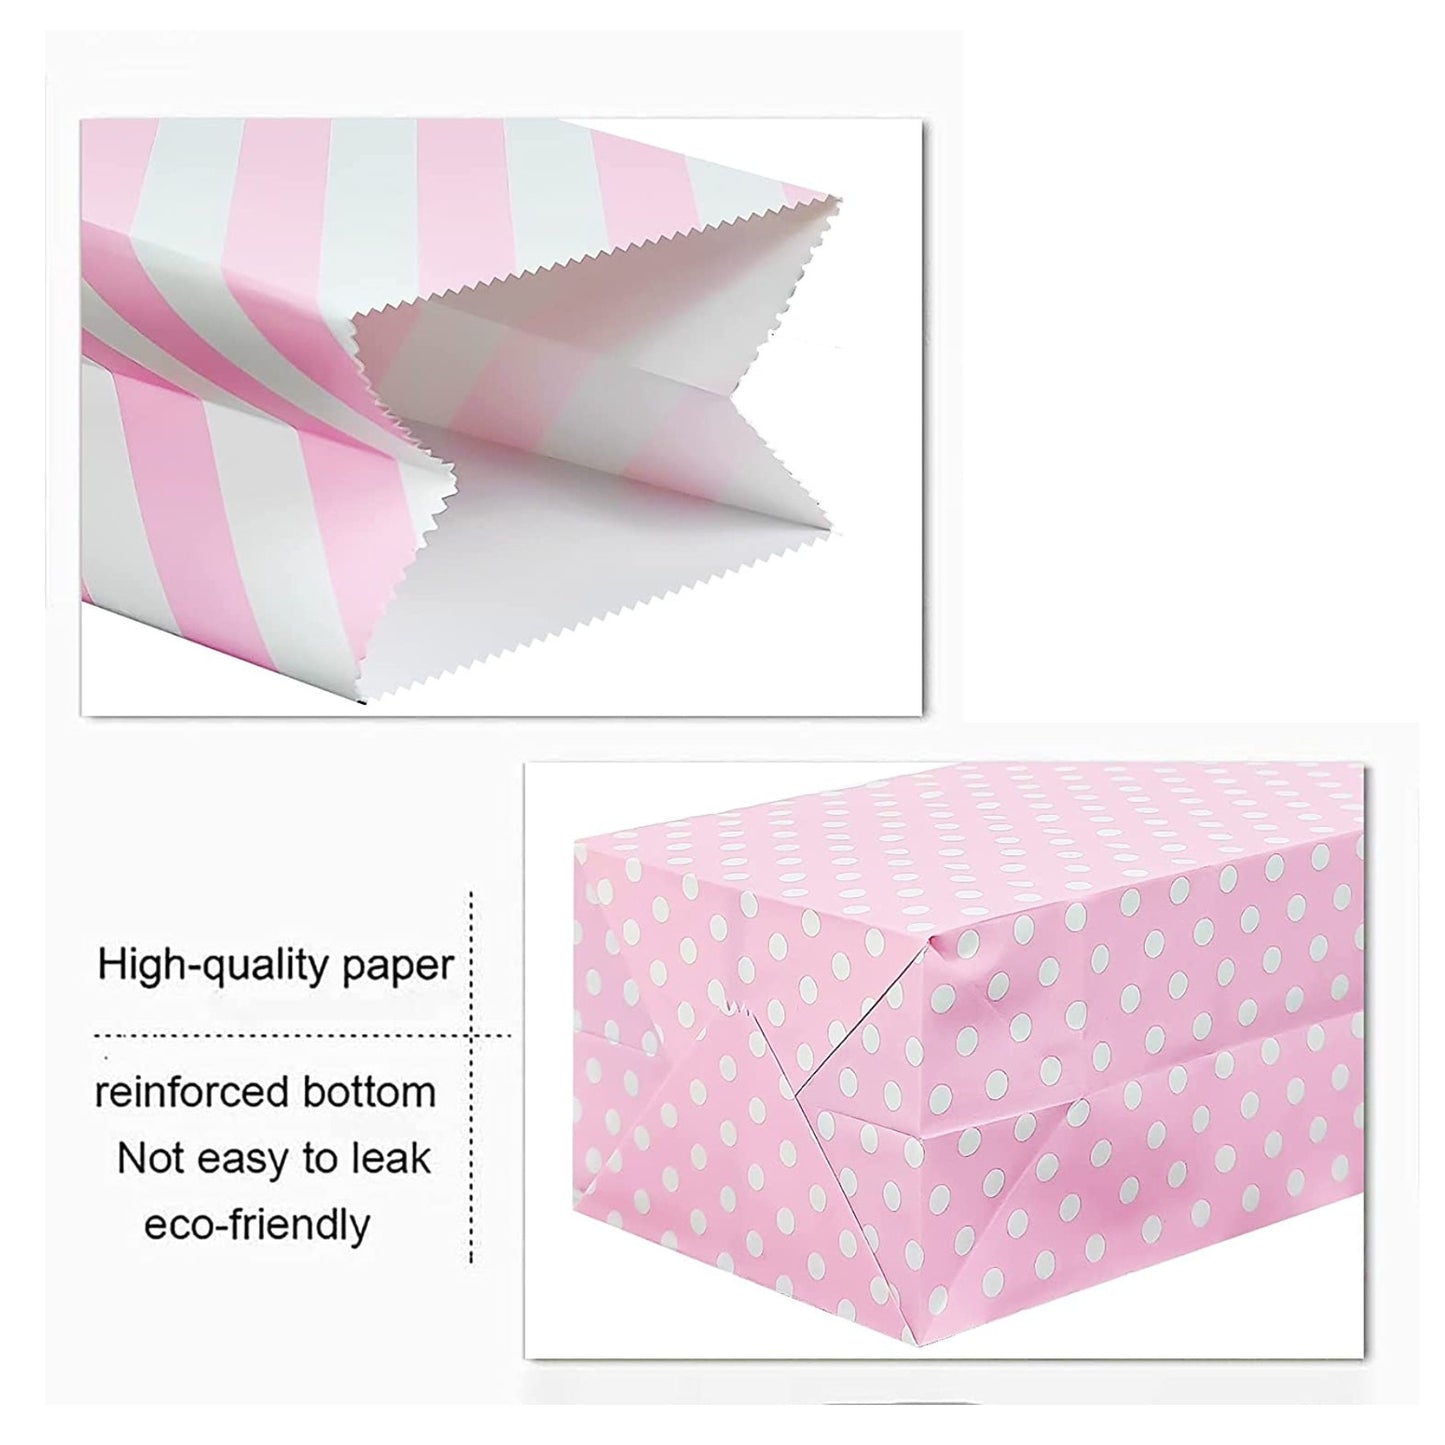 Striped and Polka Dot Paper Bags Treat Bags